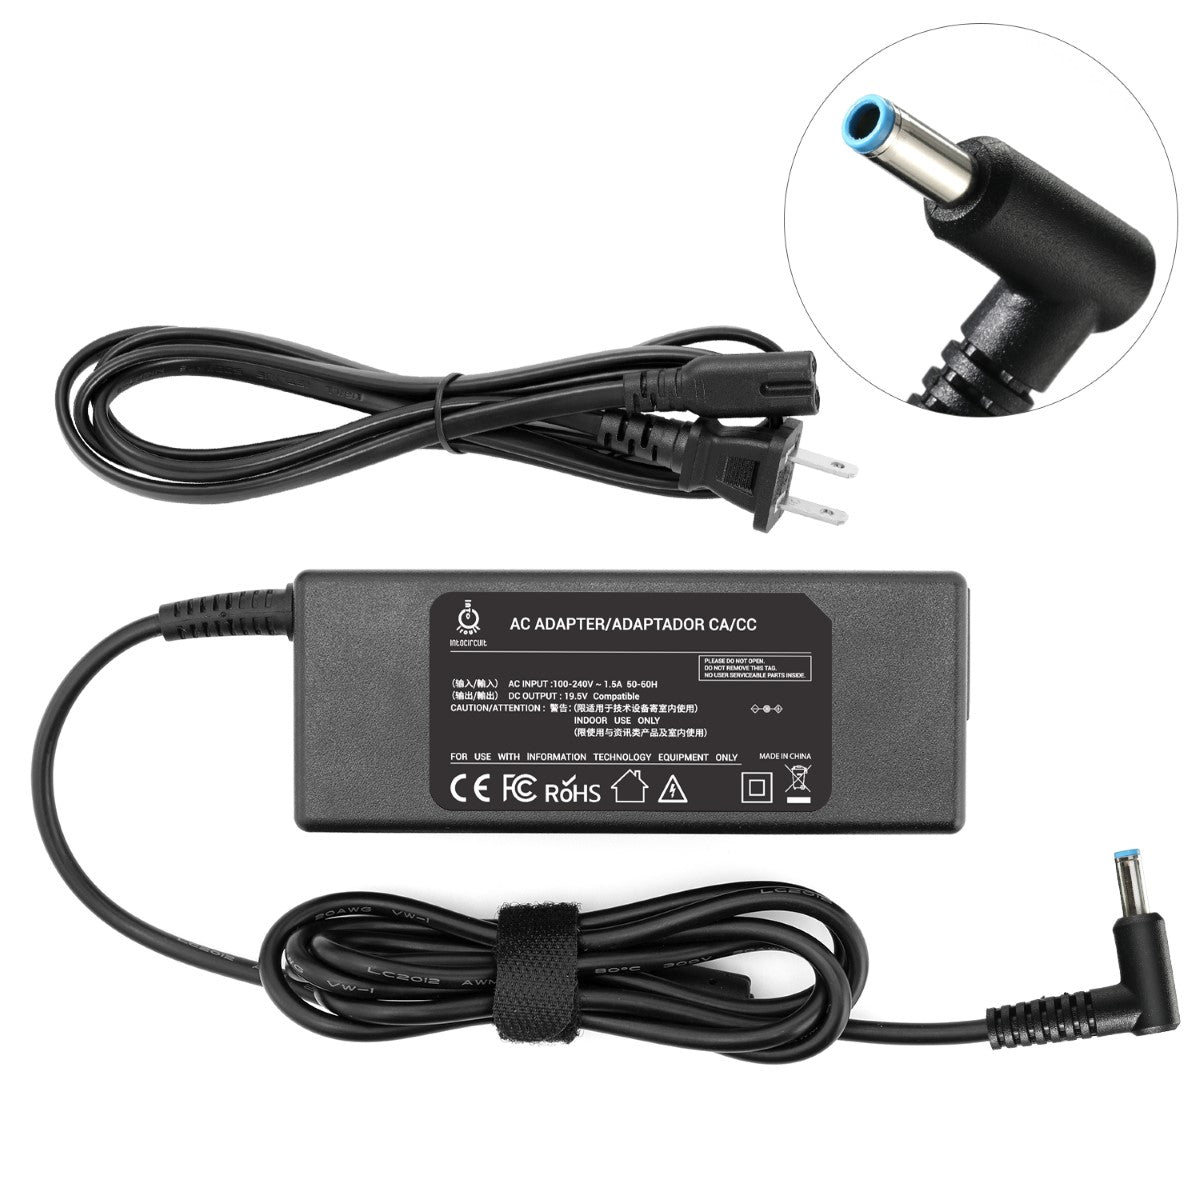 Charger for HP x360 11-p122nr Convertible Laptop